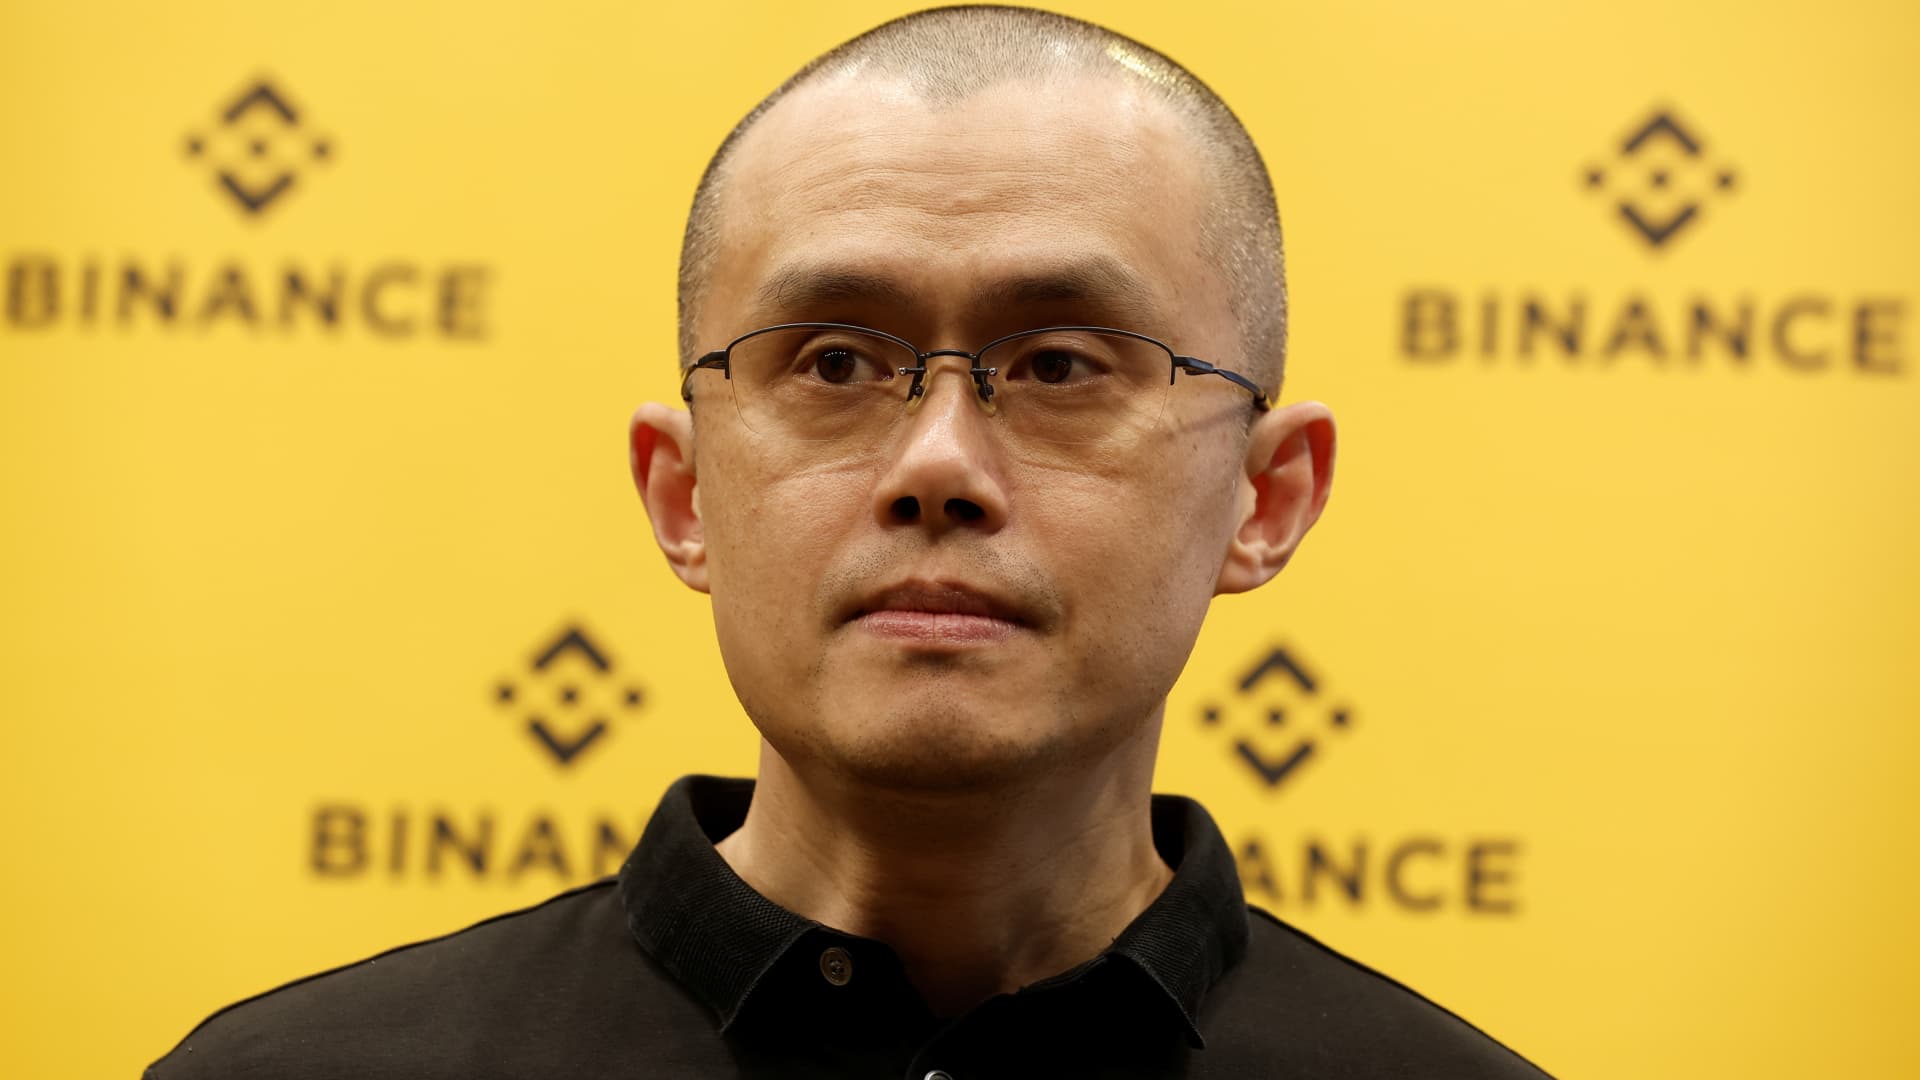 Changpeng Zhao, founder and CEO of Binance